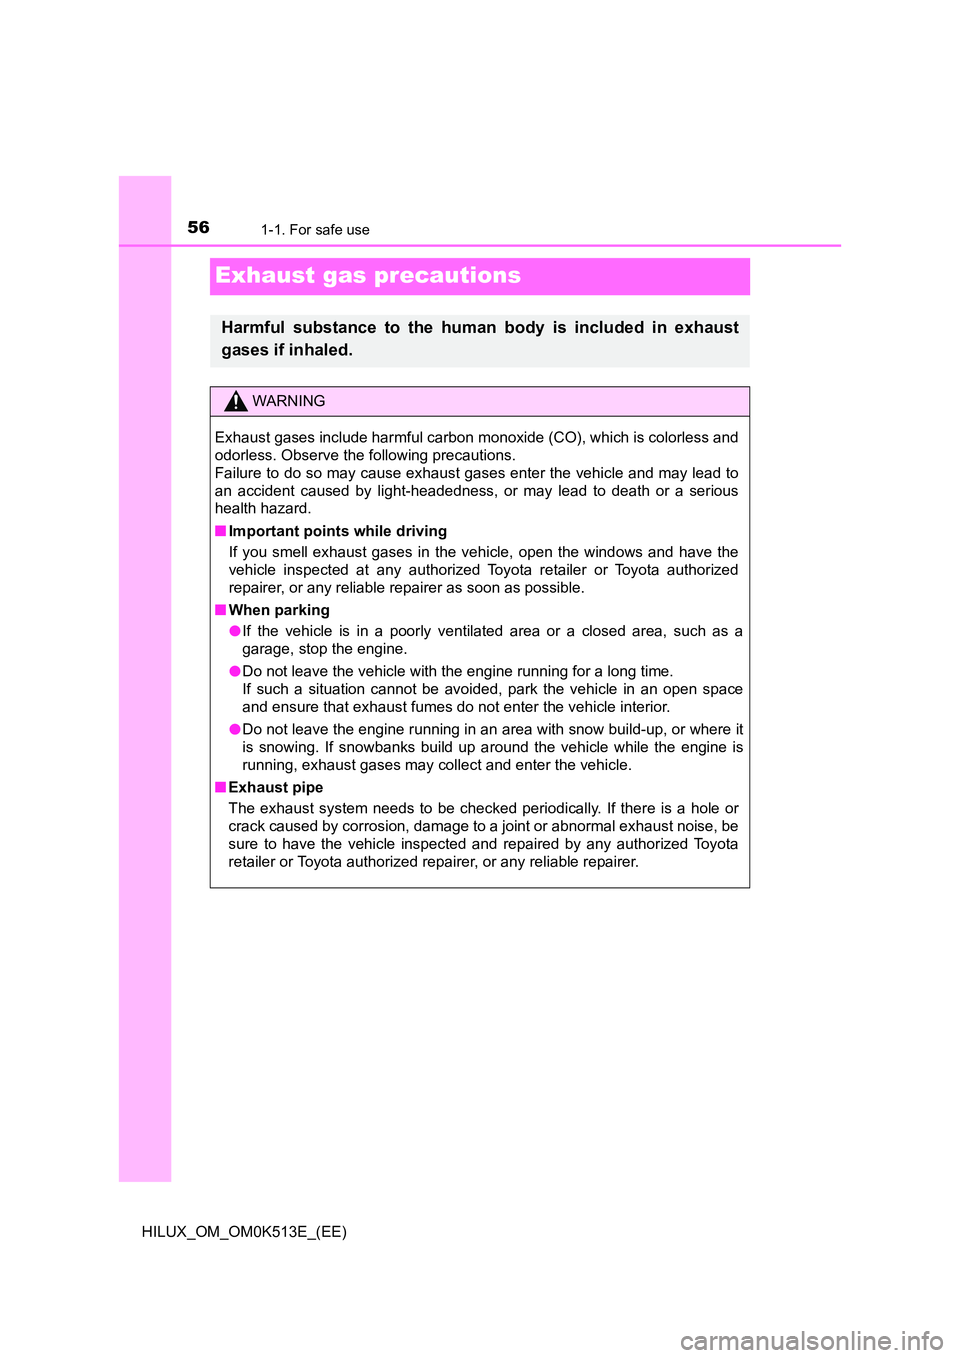 TOYOTA HILUX 2021  Owners Manual (in English) 561-1. For safe use
HILUX_OM_OM0K513E_(EE)
Exhaust gas precautions
Harmful substance to the human body is included in exhaust 
gases if inhaled.
WARNING
Exhaust gases include harmful carbon monoxide (